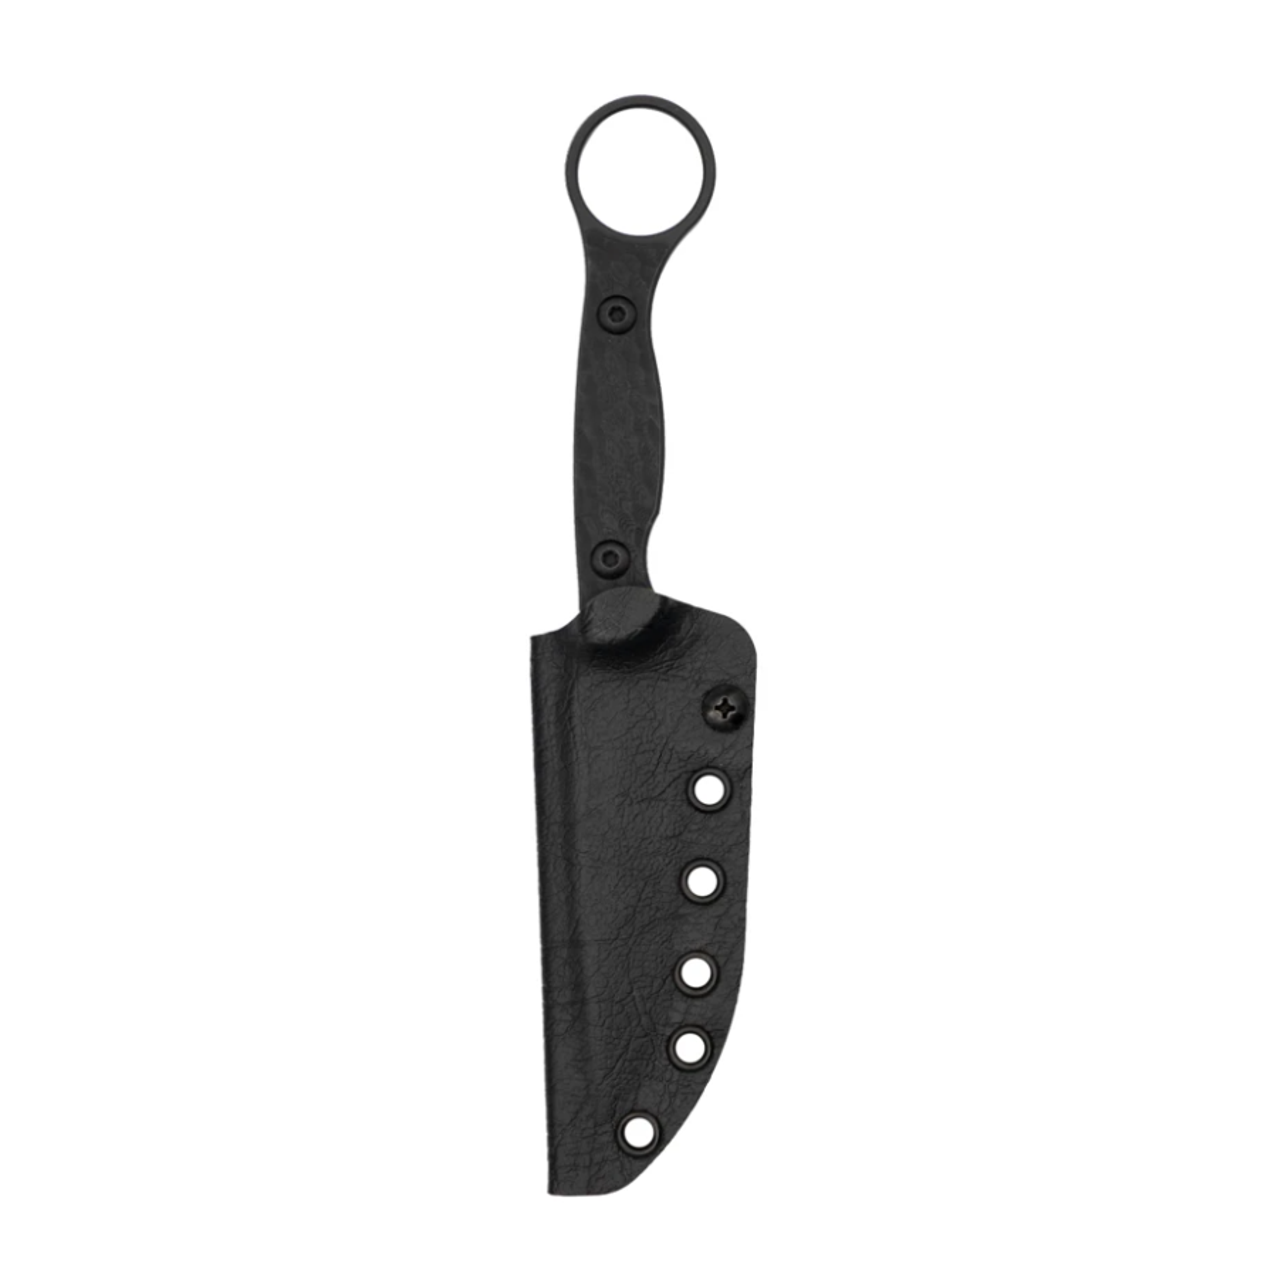 Toor Knives Ultimate Belt Attachment